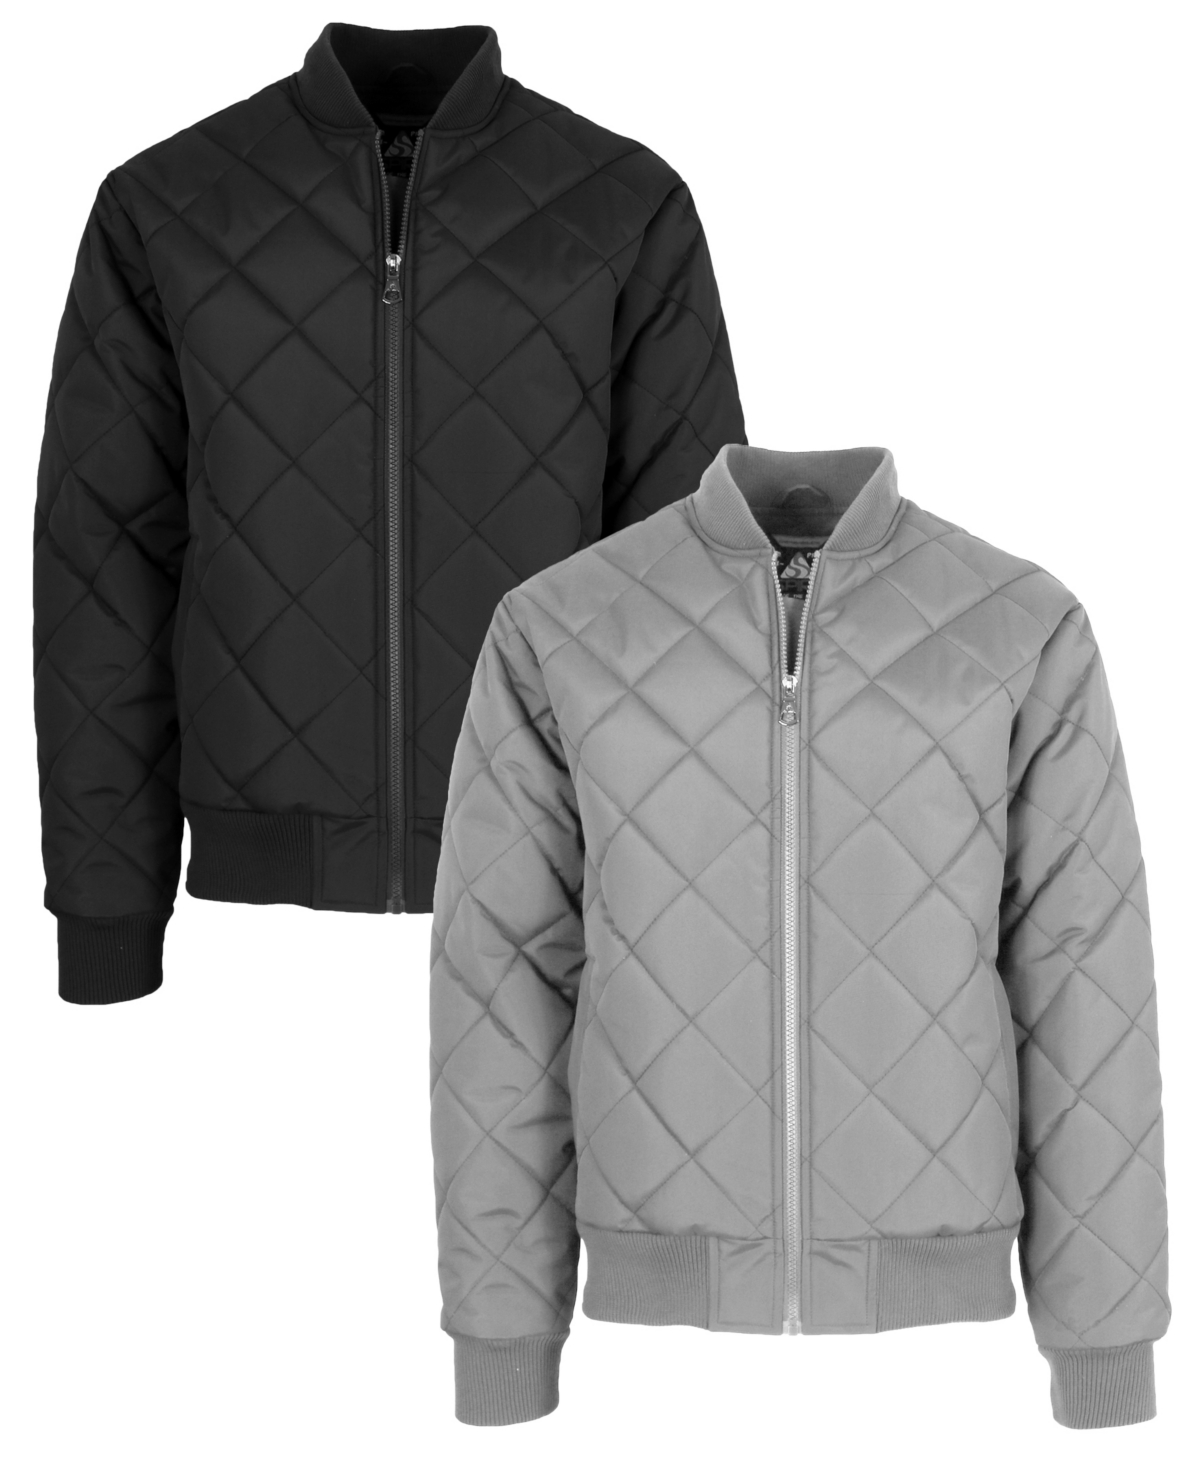 Spire By Galaxy Men's Quilted Bomber Jacket, Pack Of 2 In Black-heather Gray